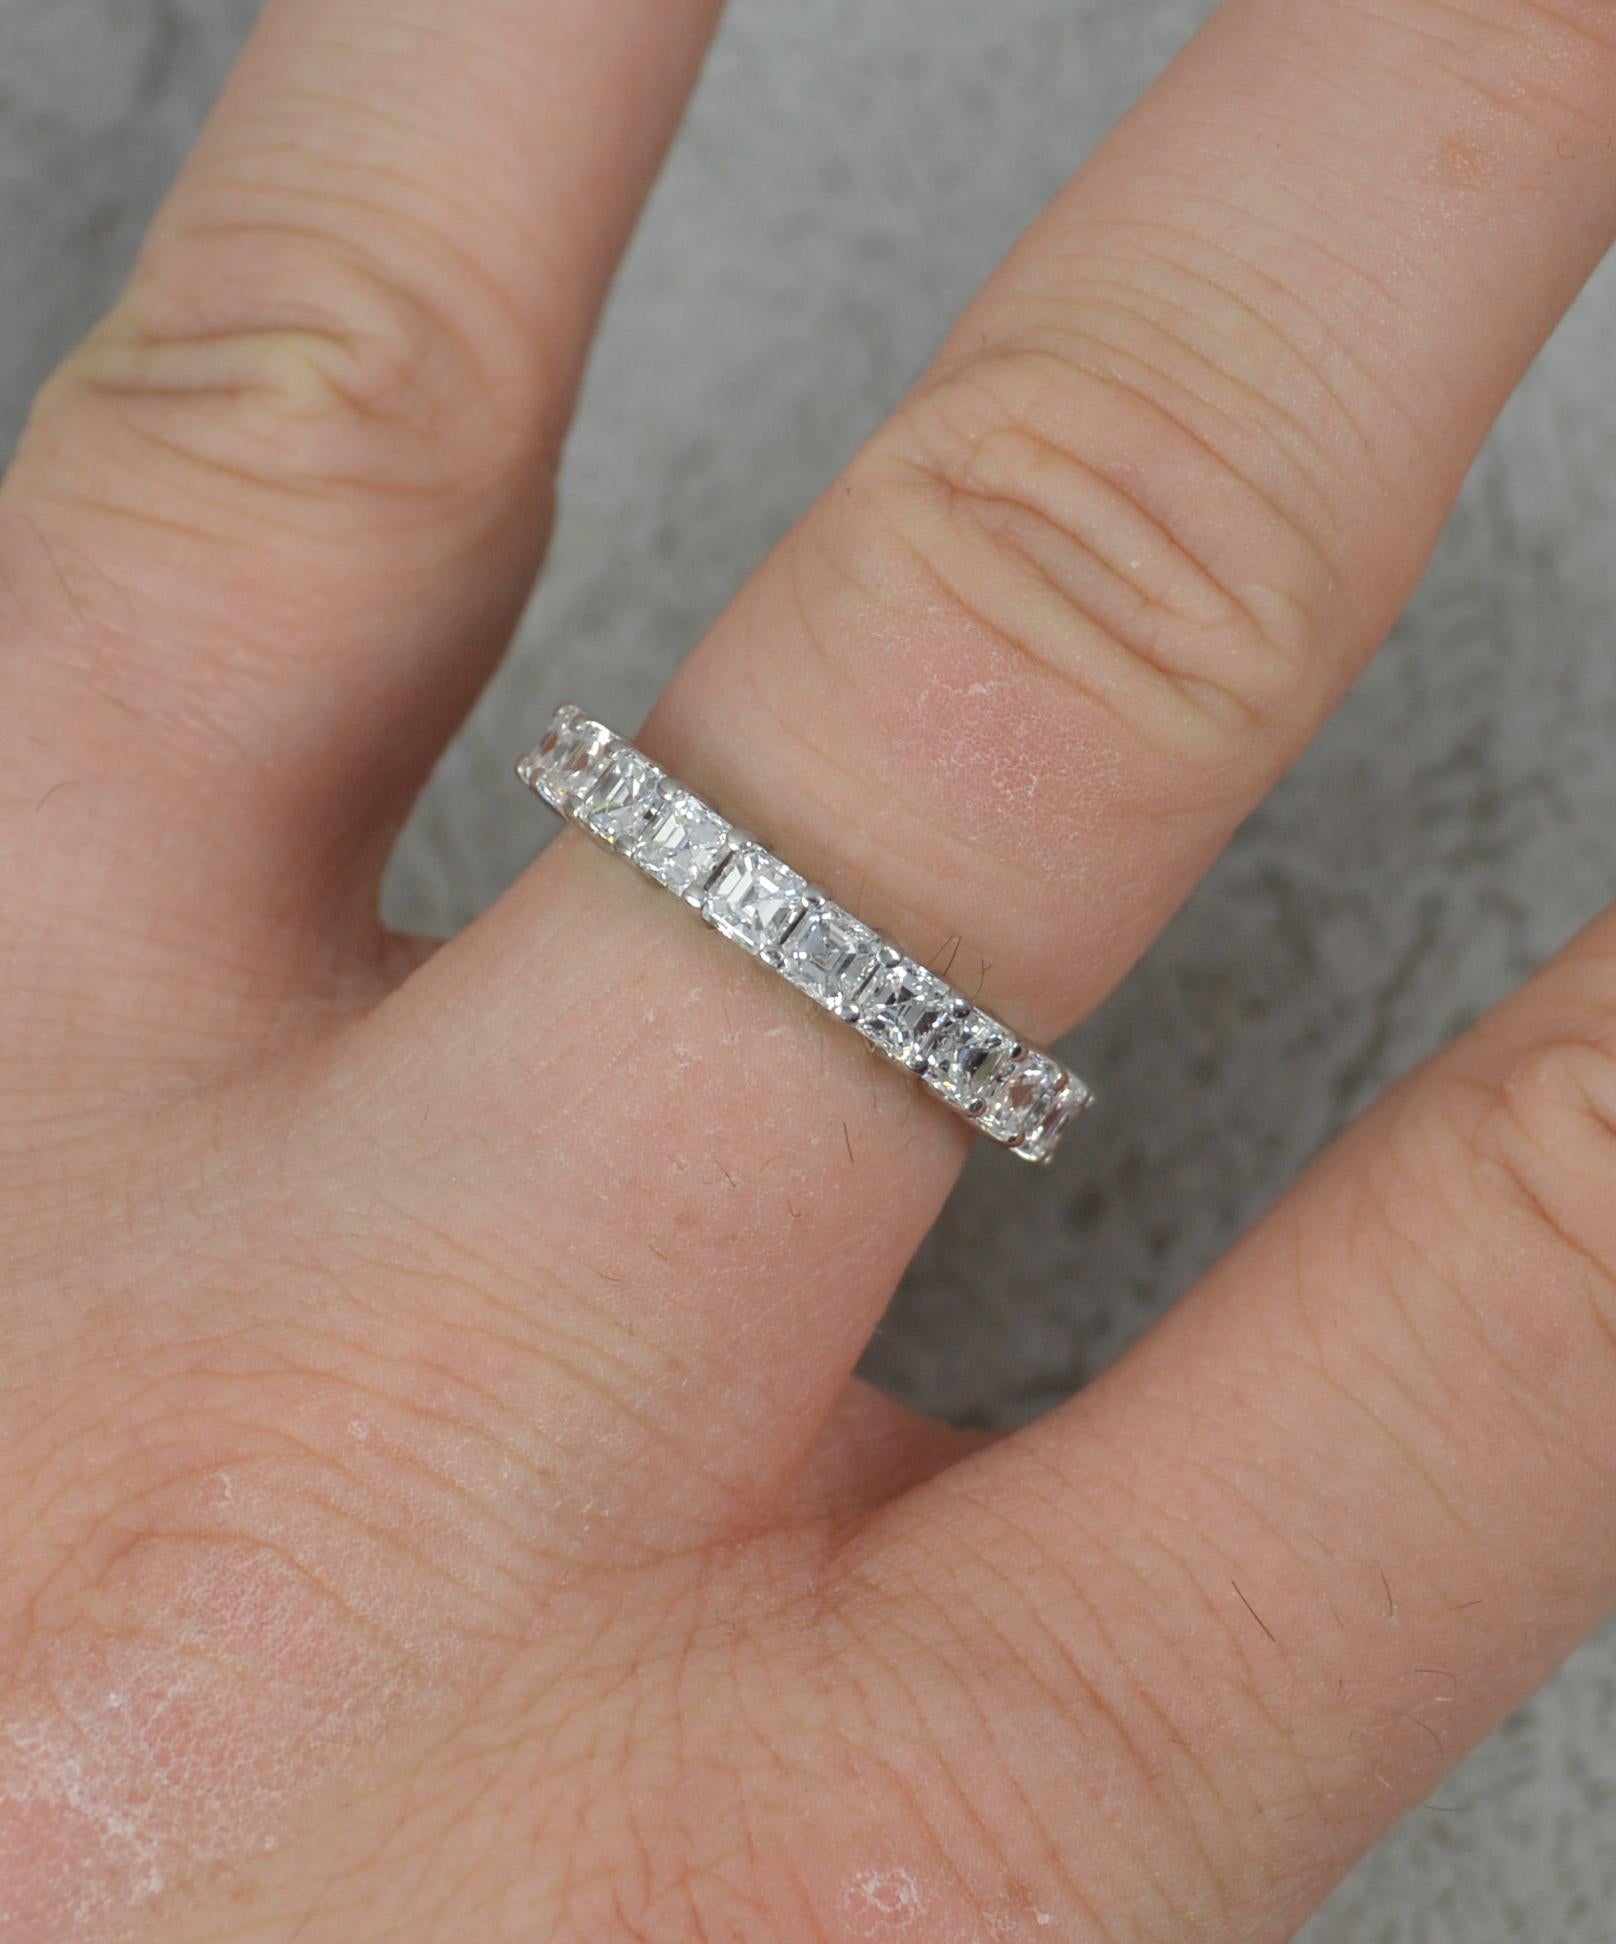 A superb contemporary diamond ring.
Solid 950 grade platinum example.
Designed as a full eternity of carre cut diamonds, 23 diamonds in total. 3.14 carat total weight, as confirmed to the shank. VVS 1 clarity, F colour.
3.6mm wide band throughout.